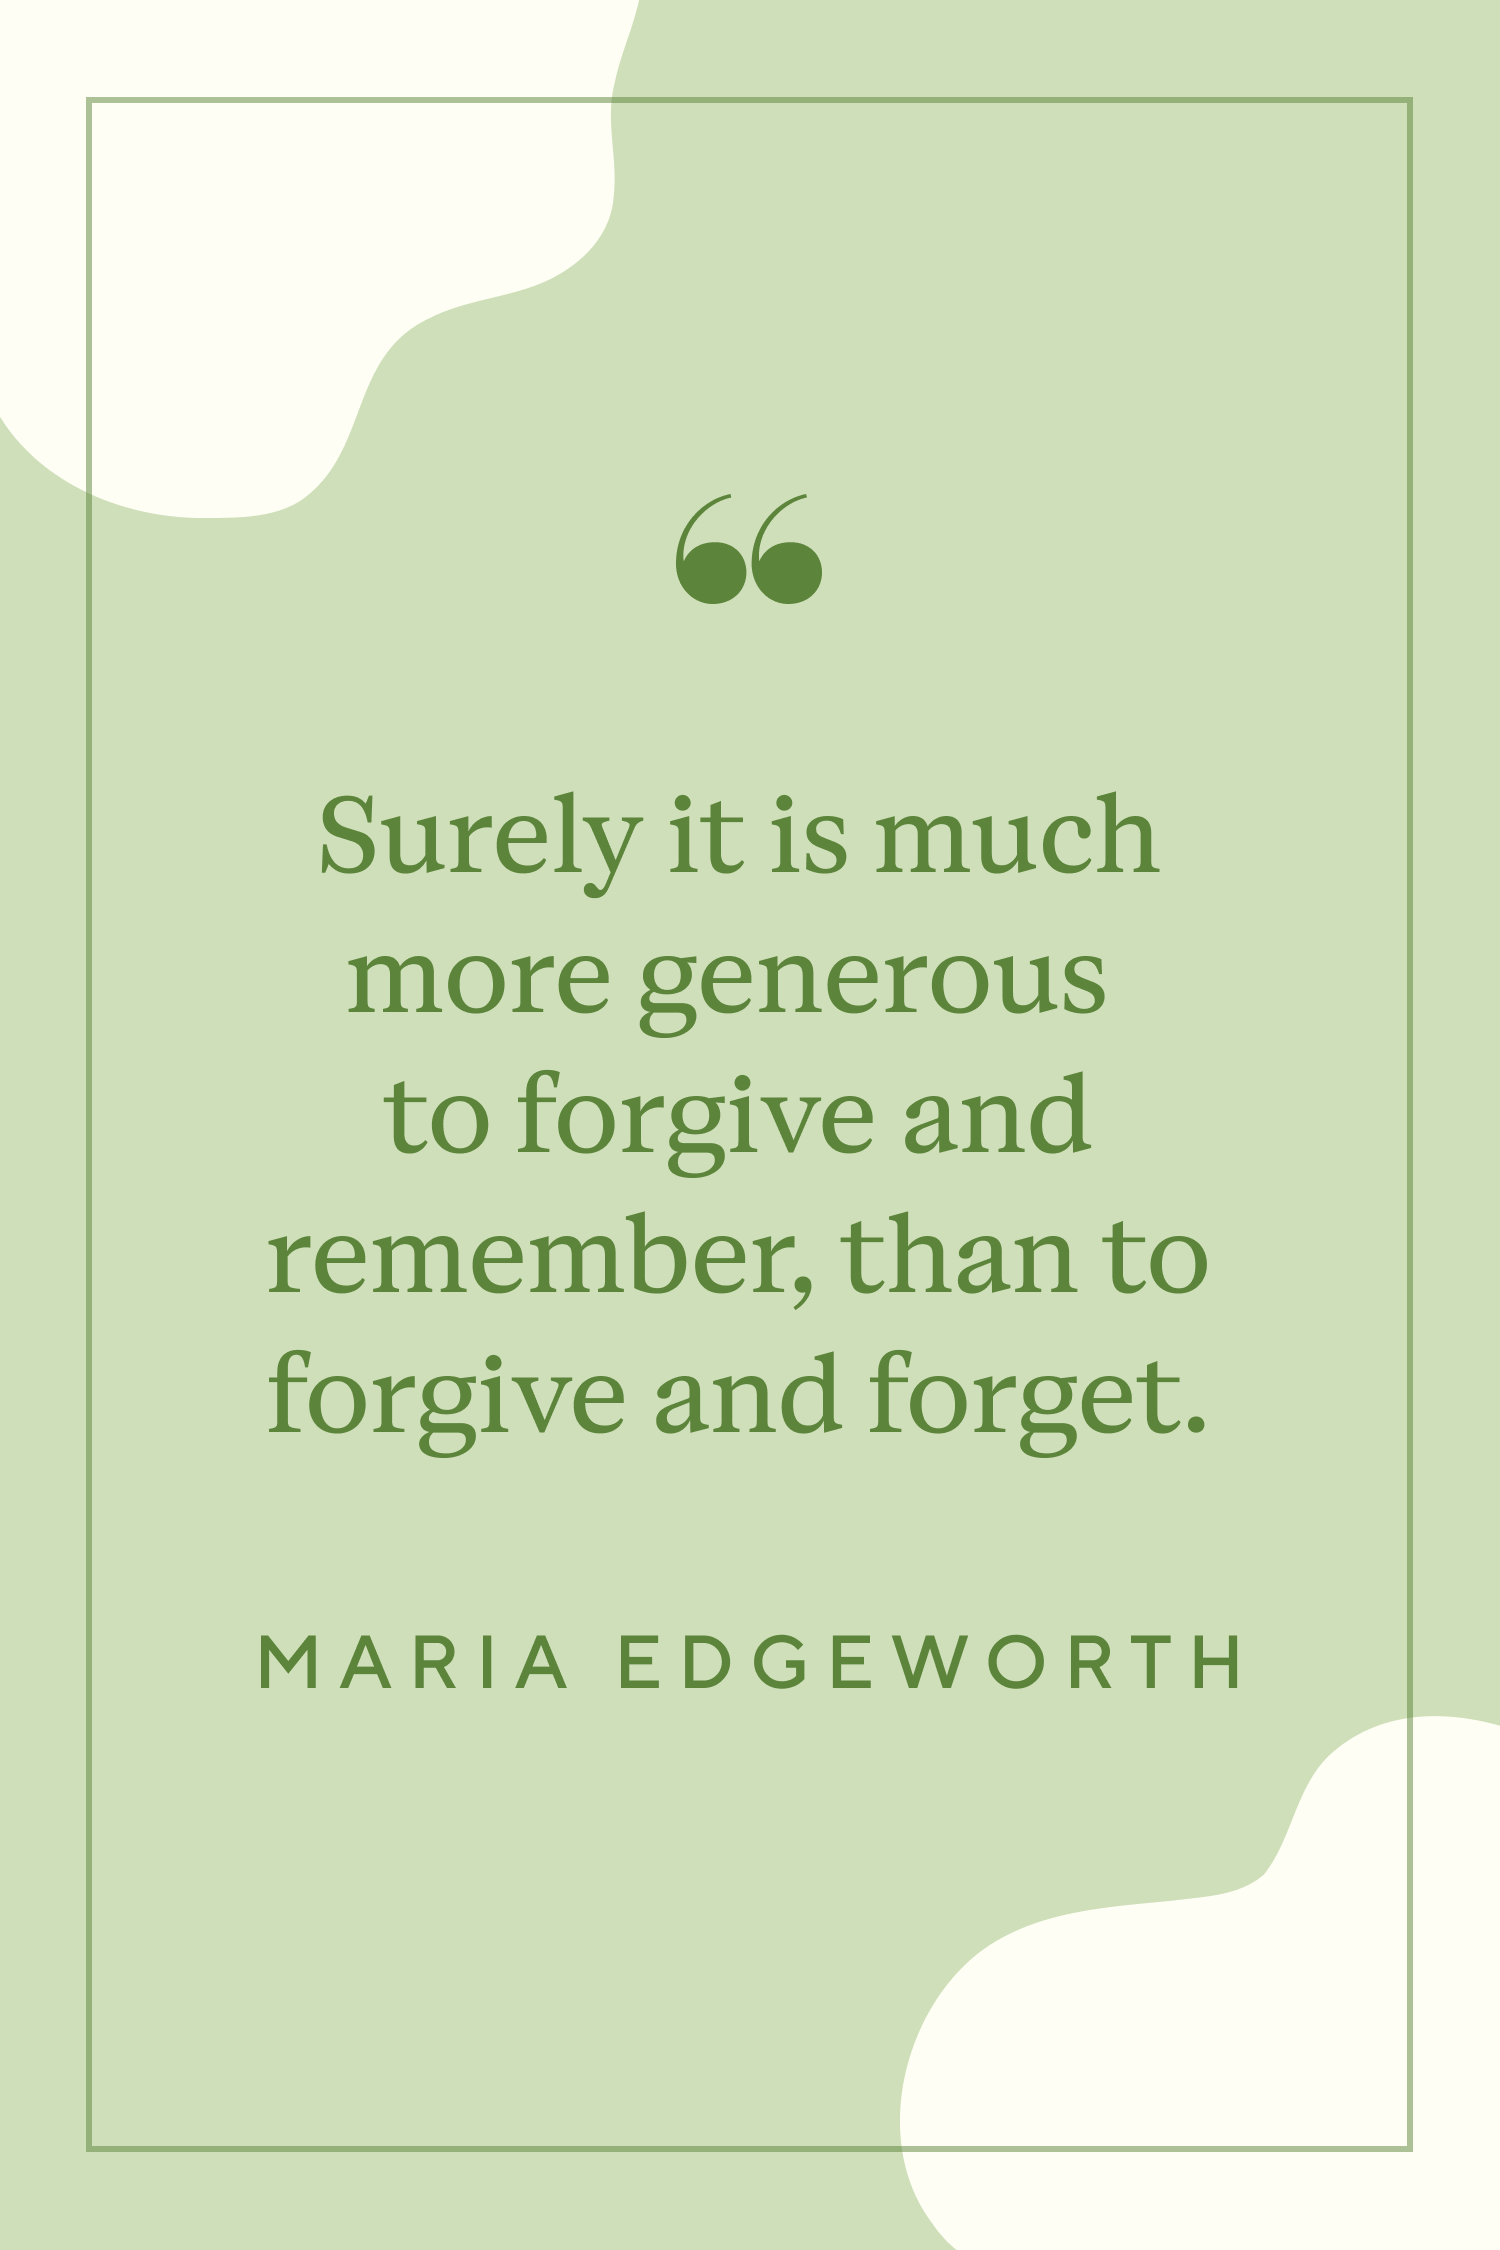 75 Forgiveness Quotes To Help You Move On